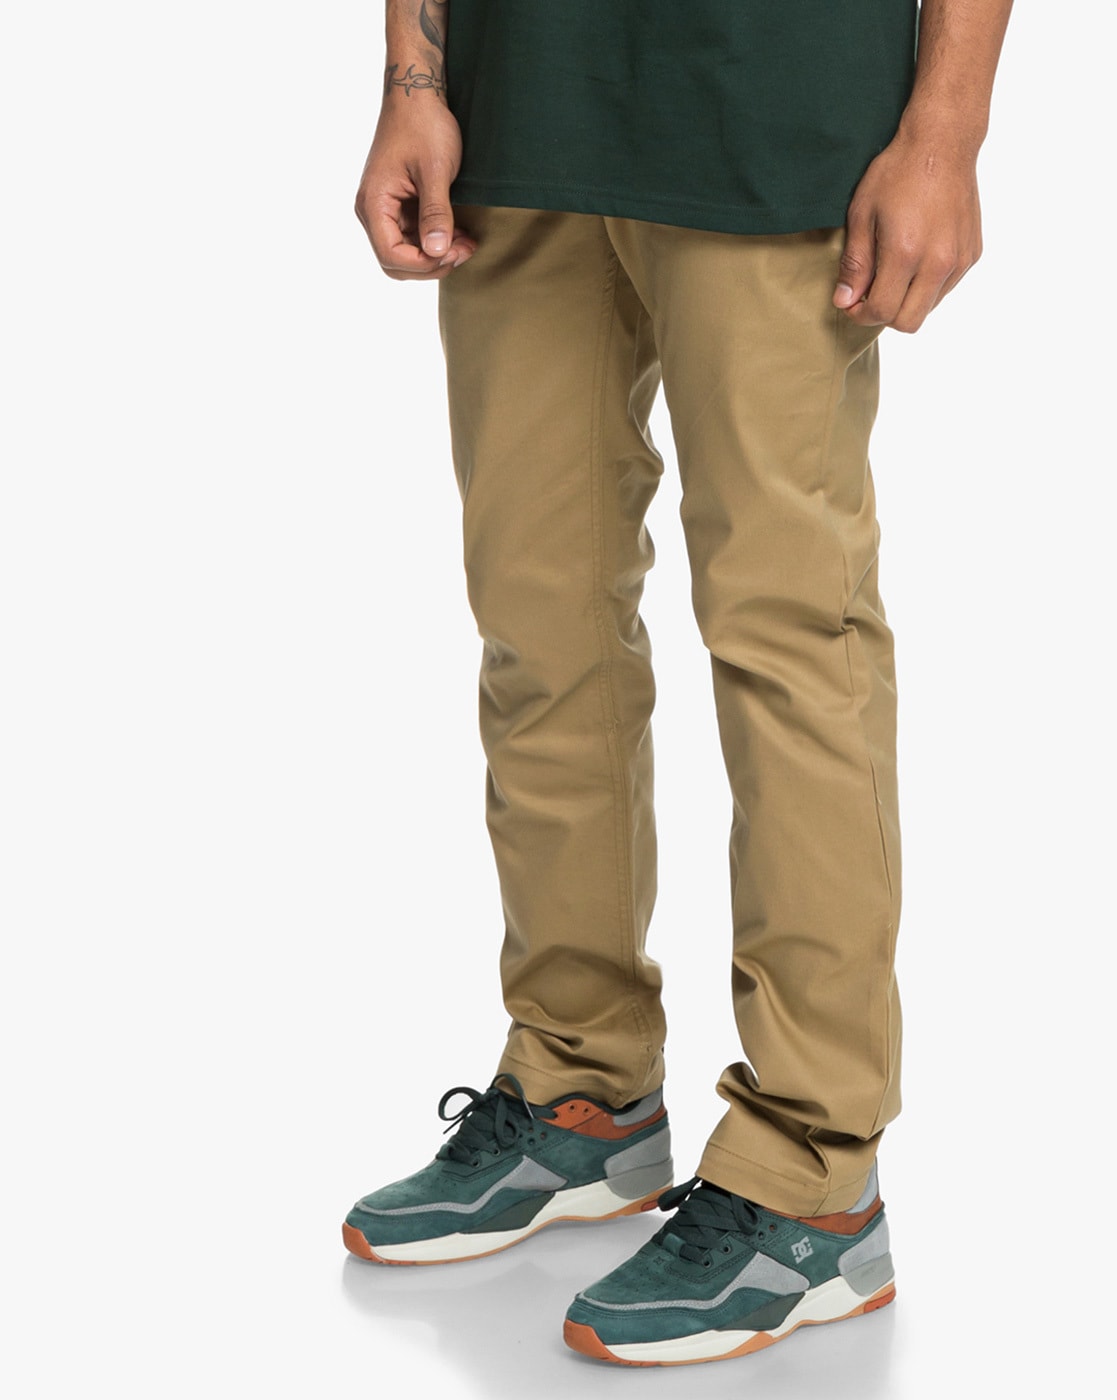 men's casual shoes with chinos